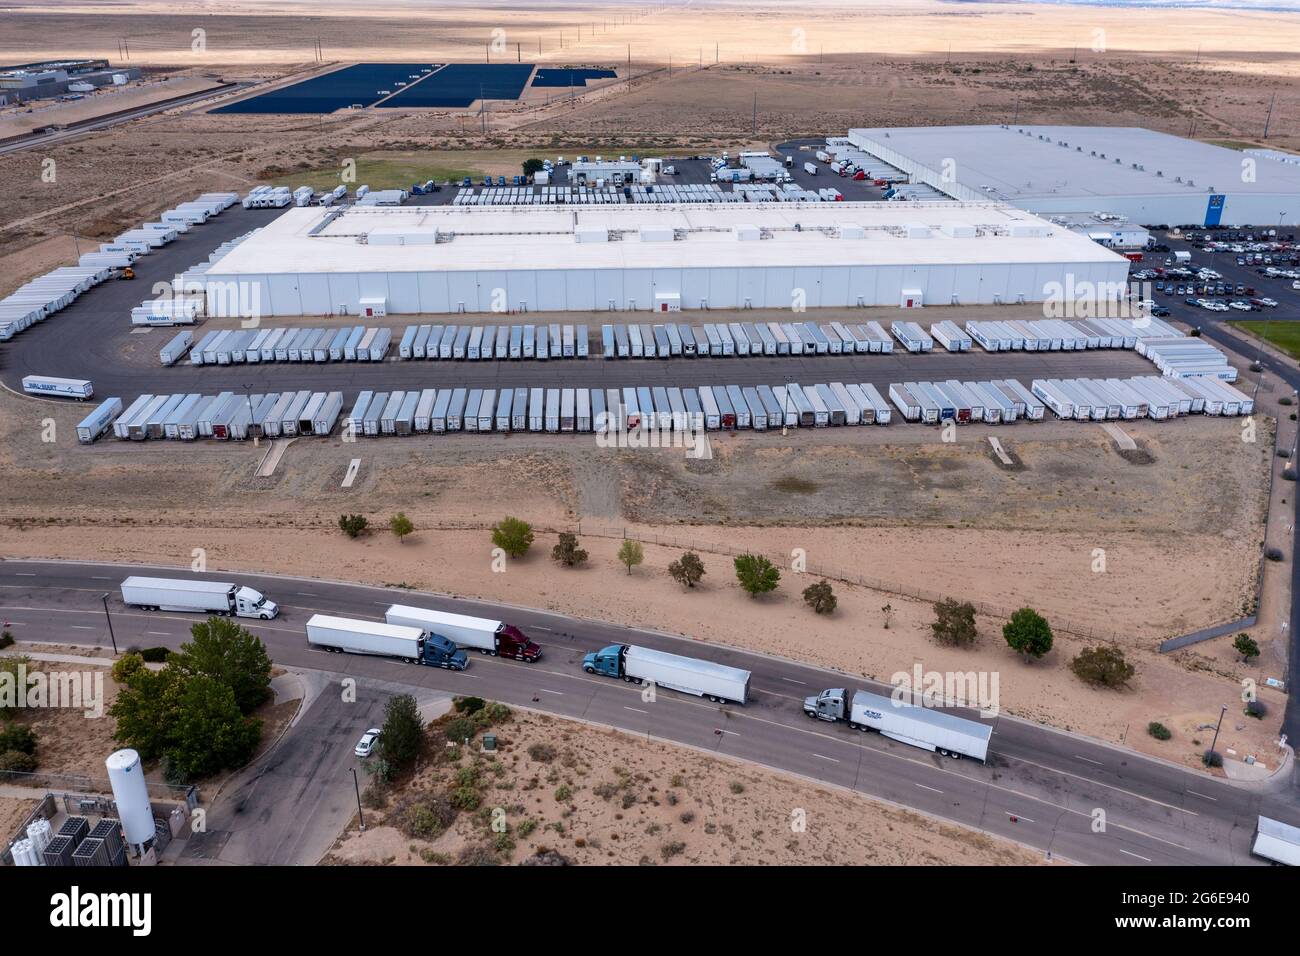 Los Lunas, New Mexico - A Walmart distribution center. Trucks wait their turn on the road outside the warehouse. Stock Photo